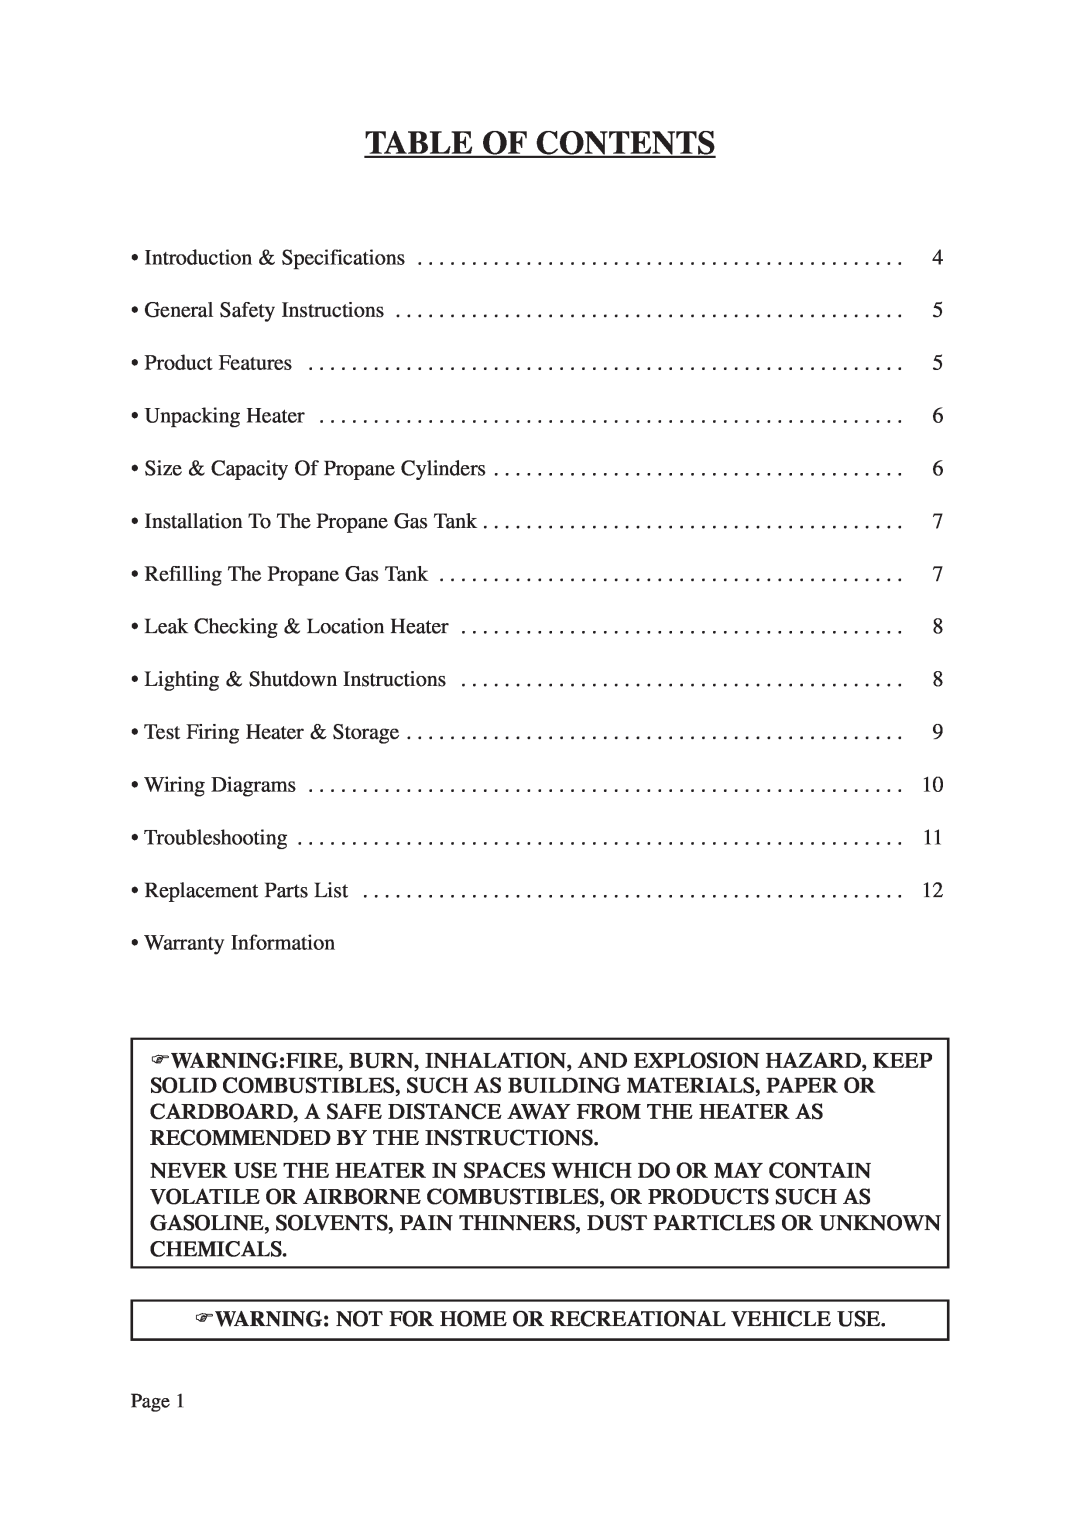 Vermont Casting CSA 2.14-2000, ANSI Z83.7-2000 instruction manual Table Of Contents 